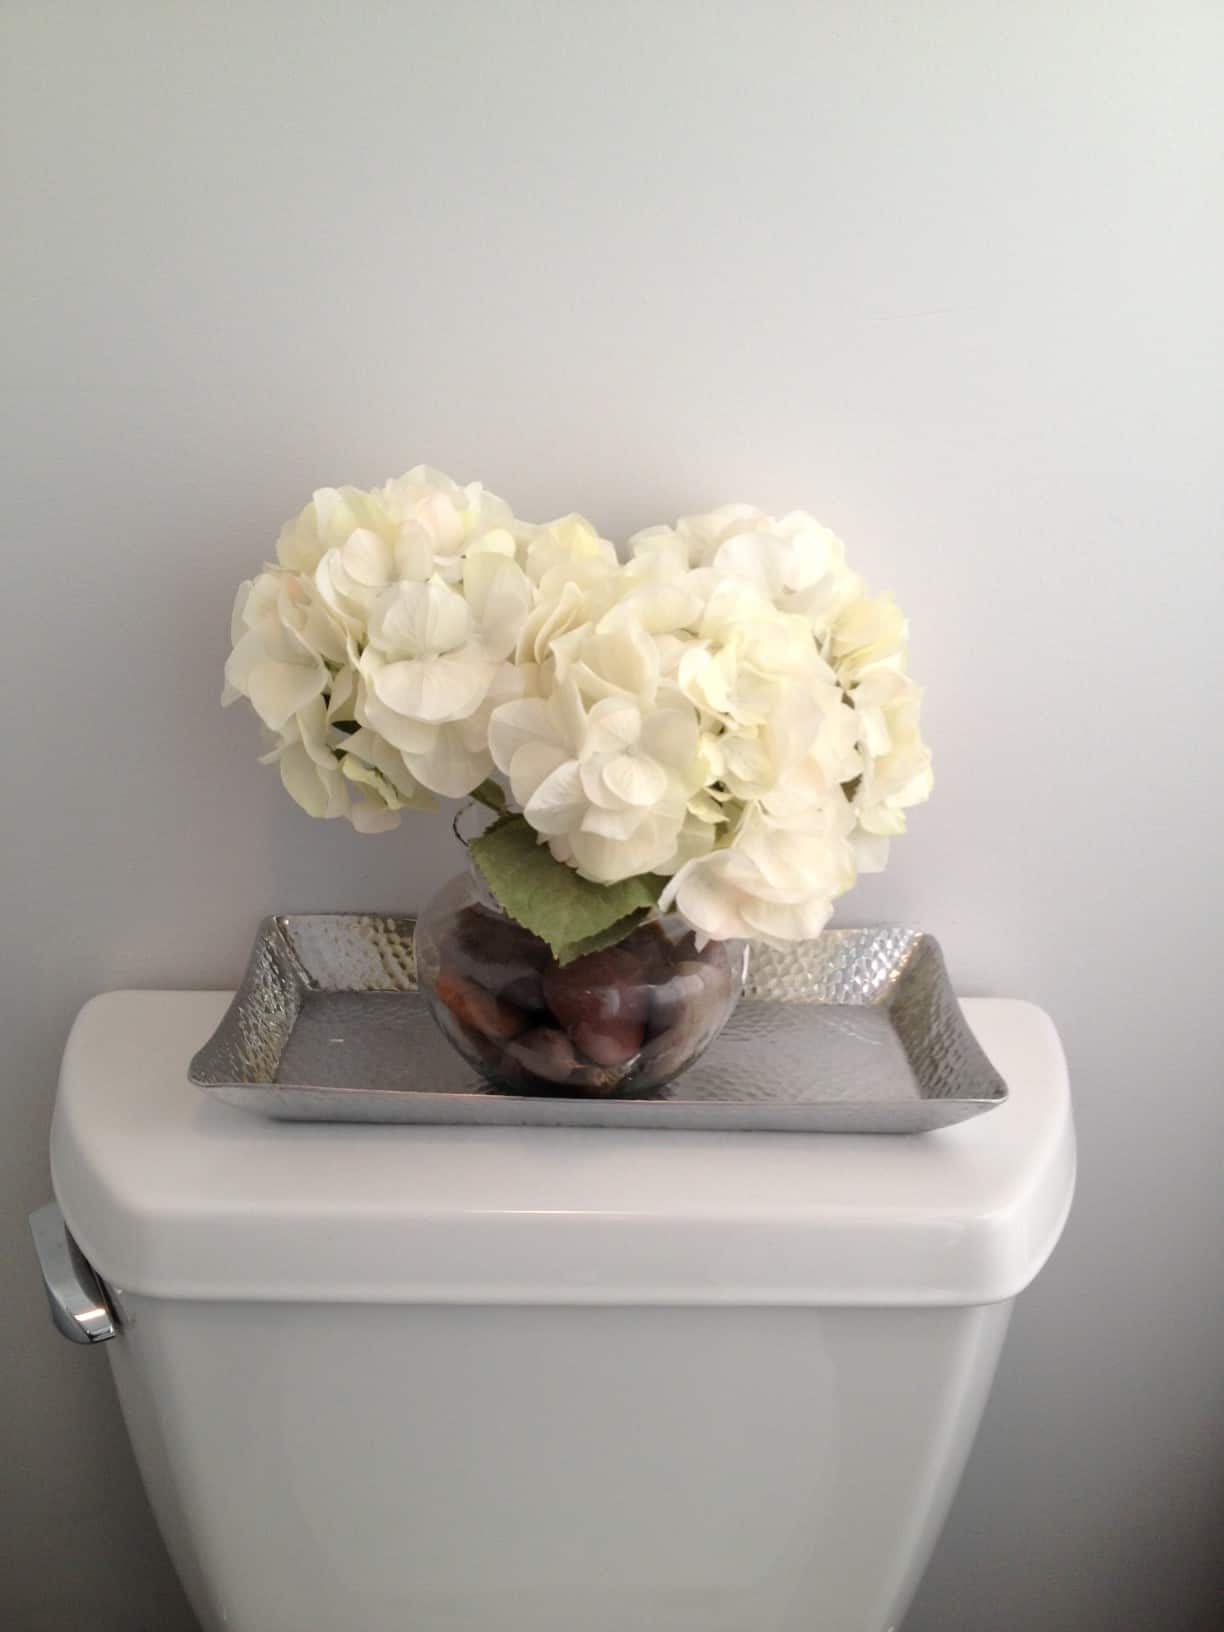 A vase of large, white flowers resting on a rectangular, silver tray on the tank of the toilet